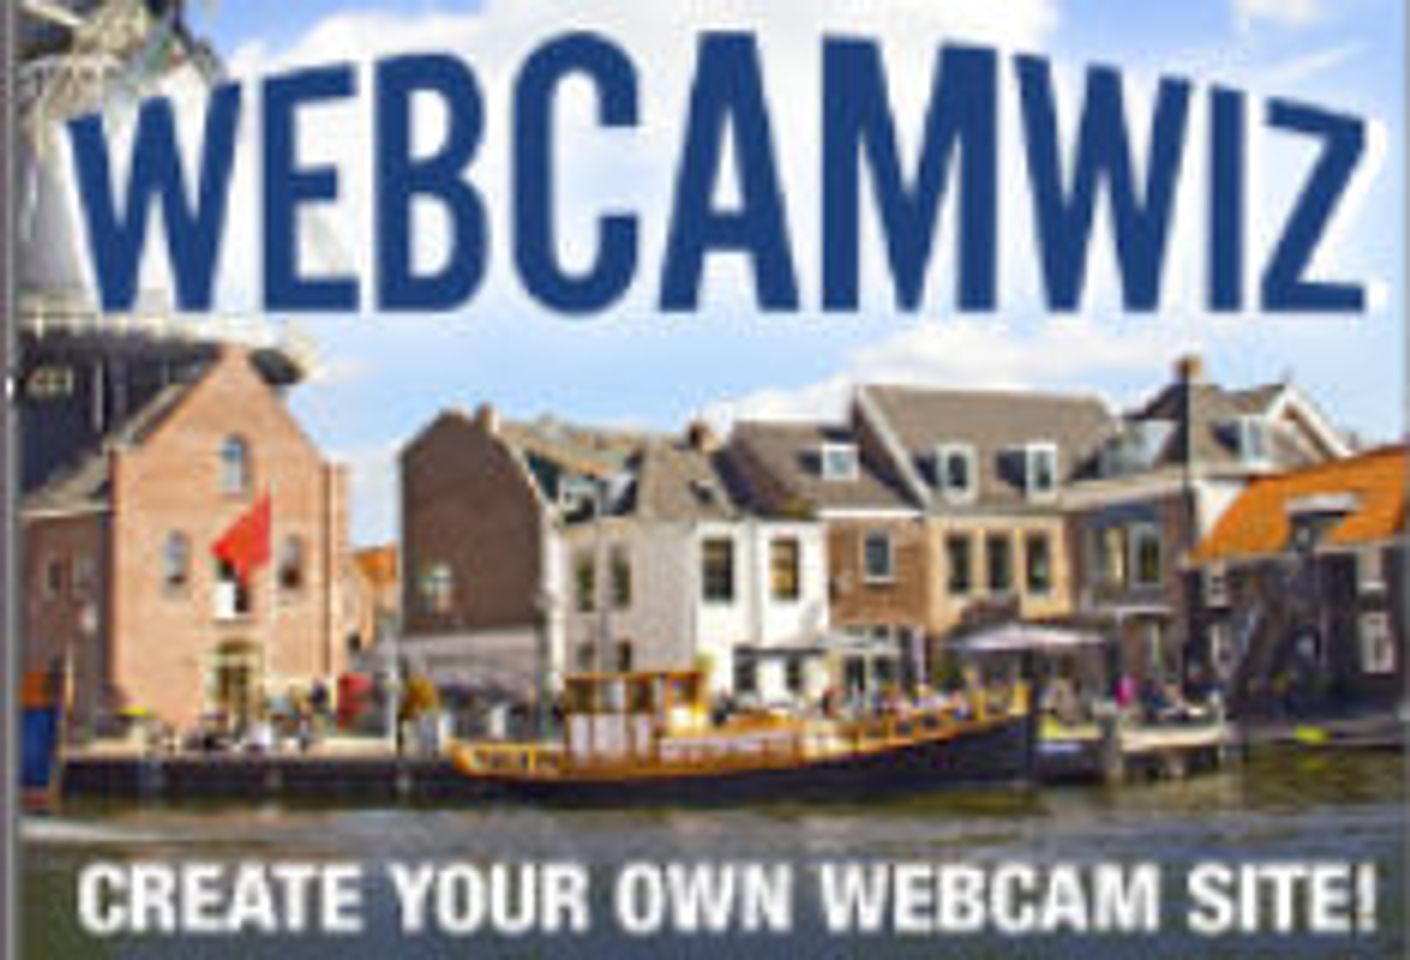 WebcamWiz Out of Beta with $50 Sign-up Bonus Campaign